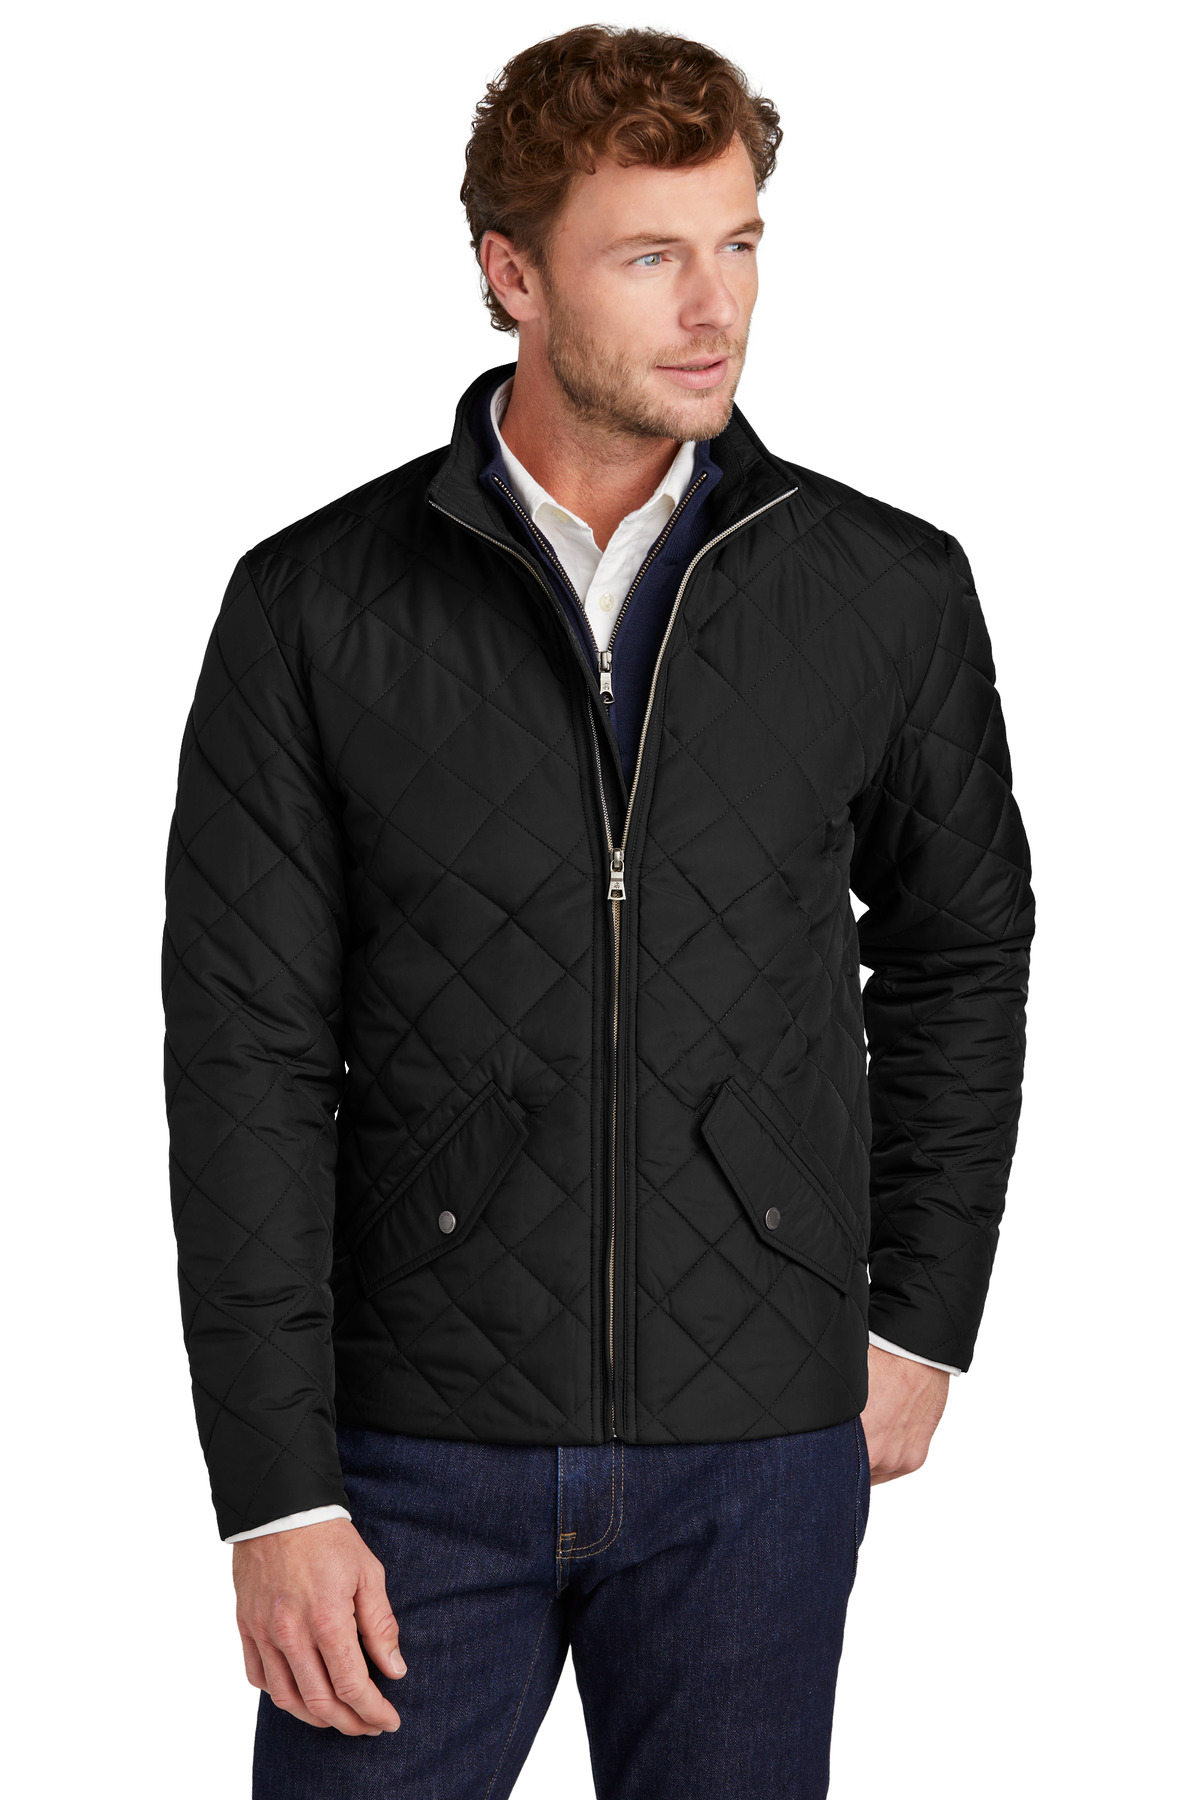 Brooks Brothers Quilted Jacket-Brooks Brothers